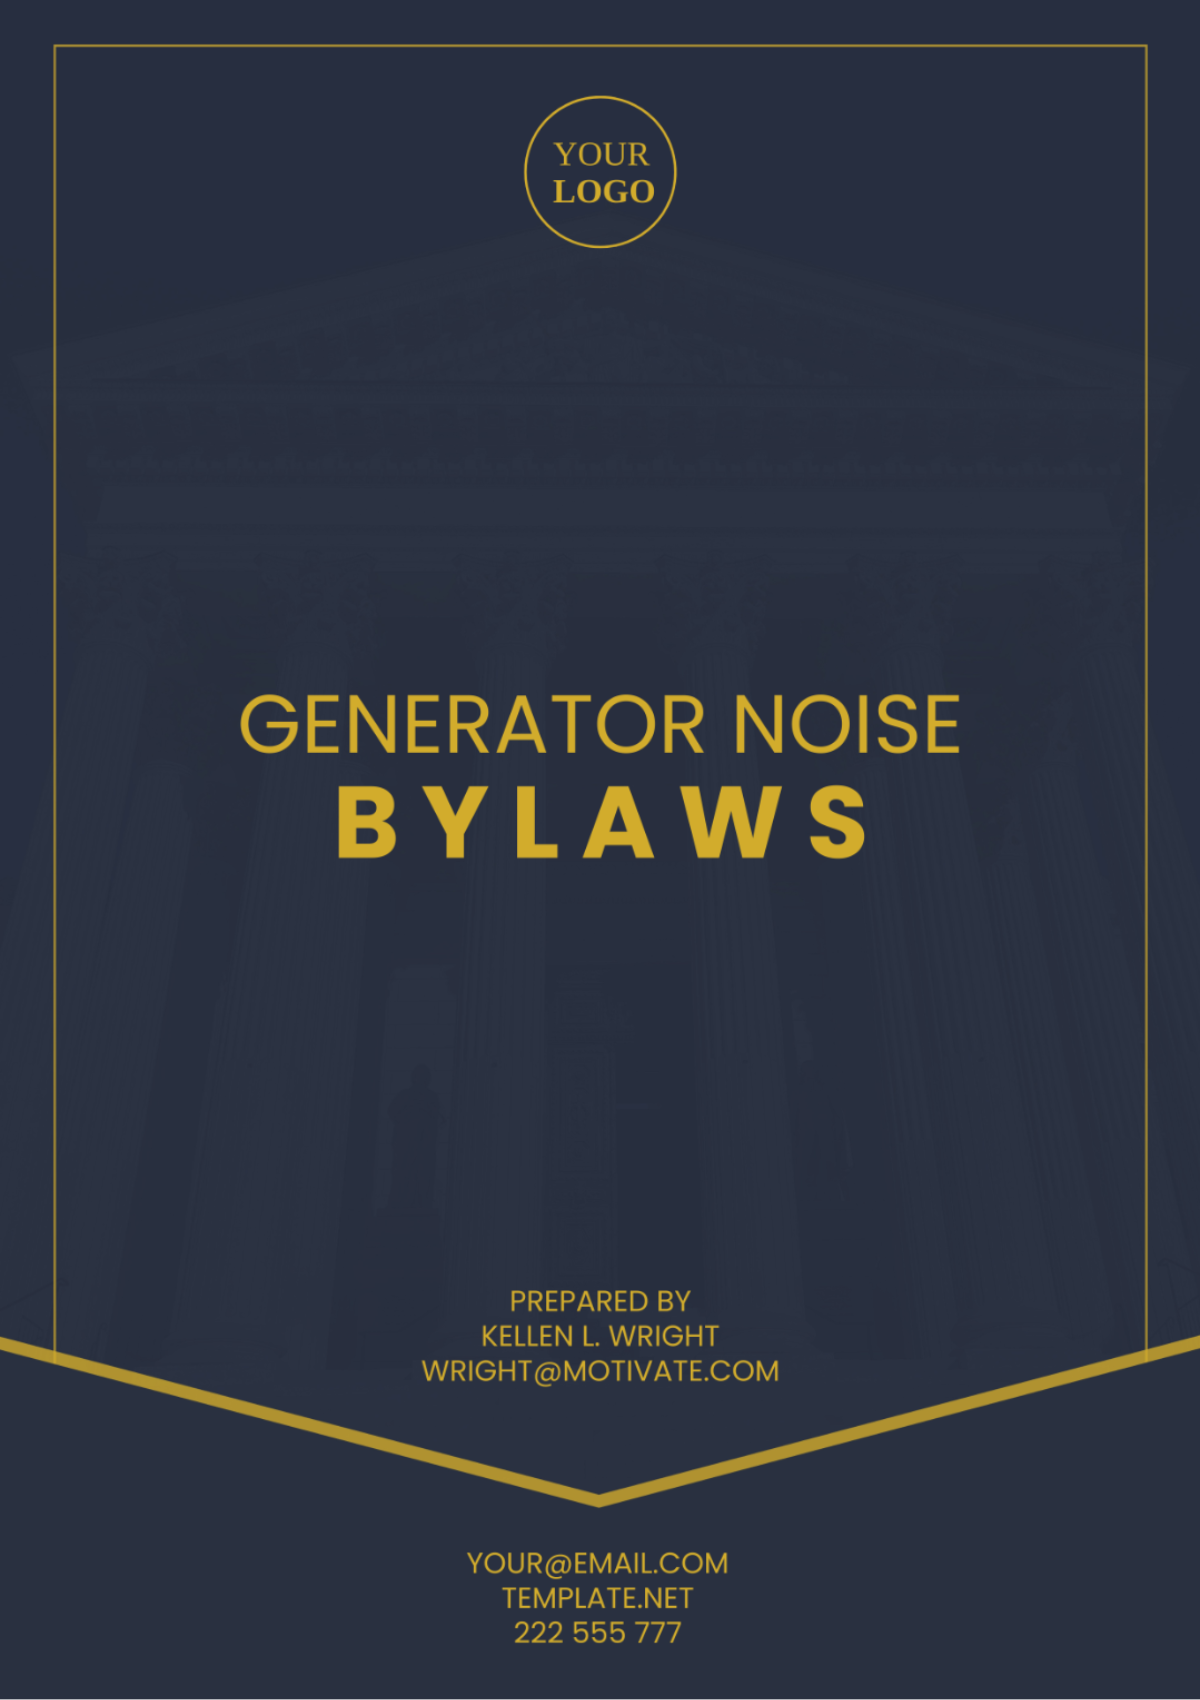 Free Generator Noise Bylaws Template